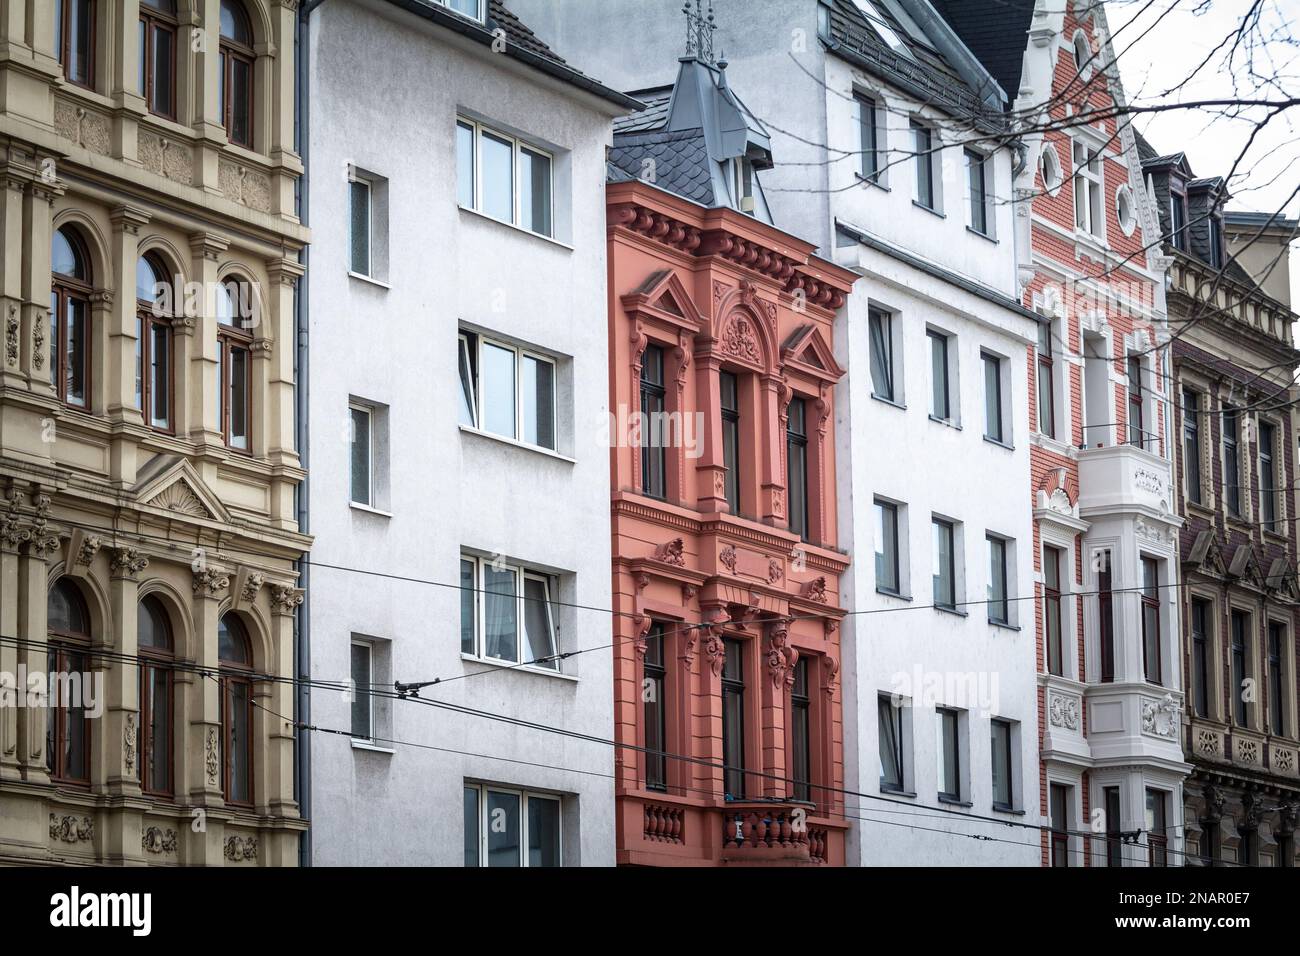 Picture of facades of residential building, with a vintage german architecture, in the city center of Cologne, Germany. Stock Photo